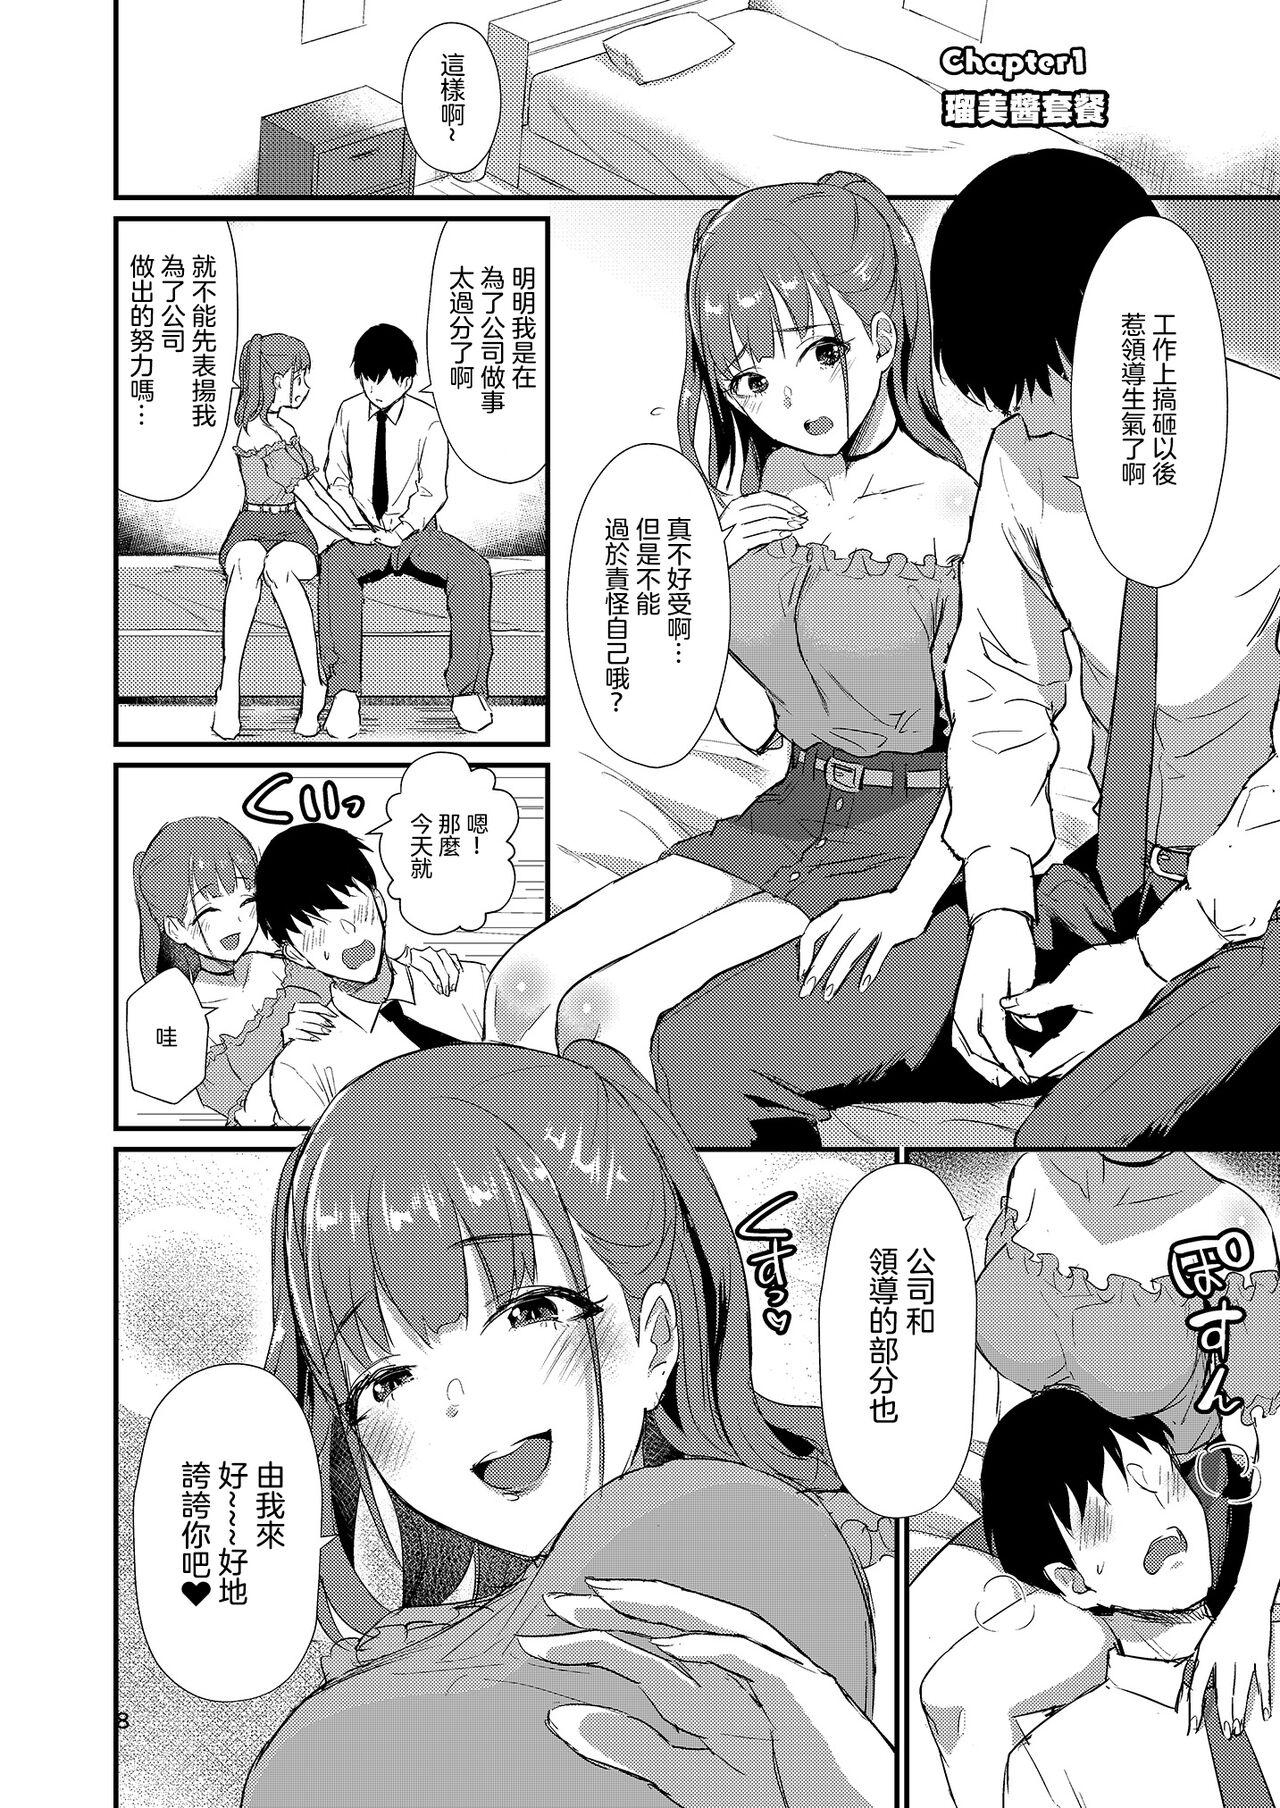 Behind Homehome Home e Youkoso! - Welcome to Home Home Home! | 歡迎來到誇誇屋！ Free Fucking - Page 9